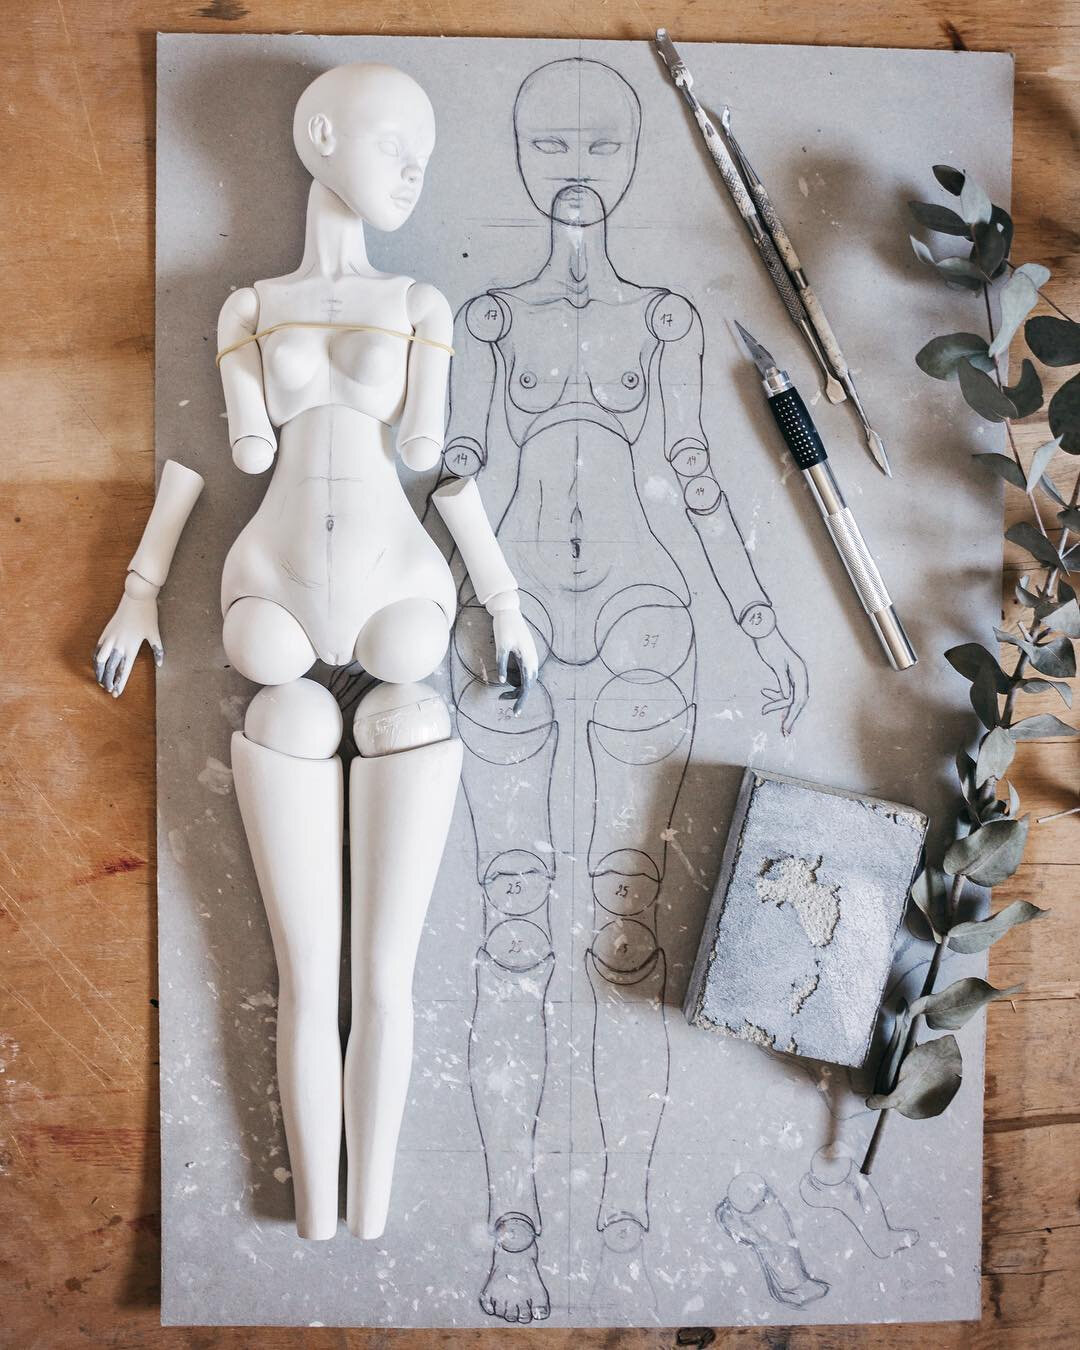 How to sculpt joints for ball-jointed dolls? — Nymphai Dolls